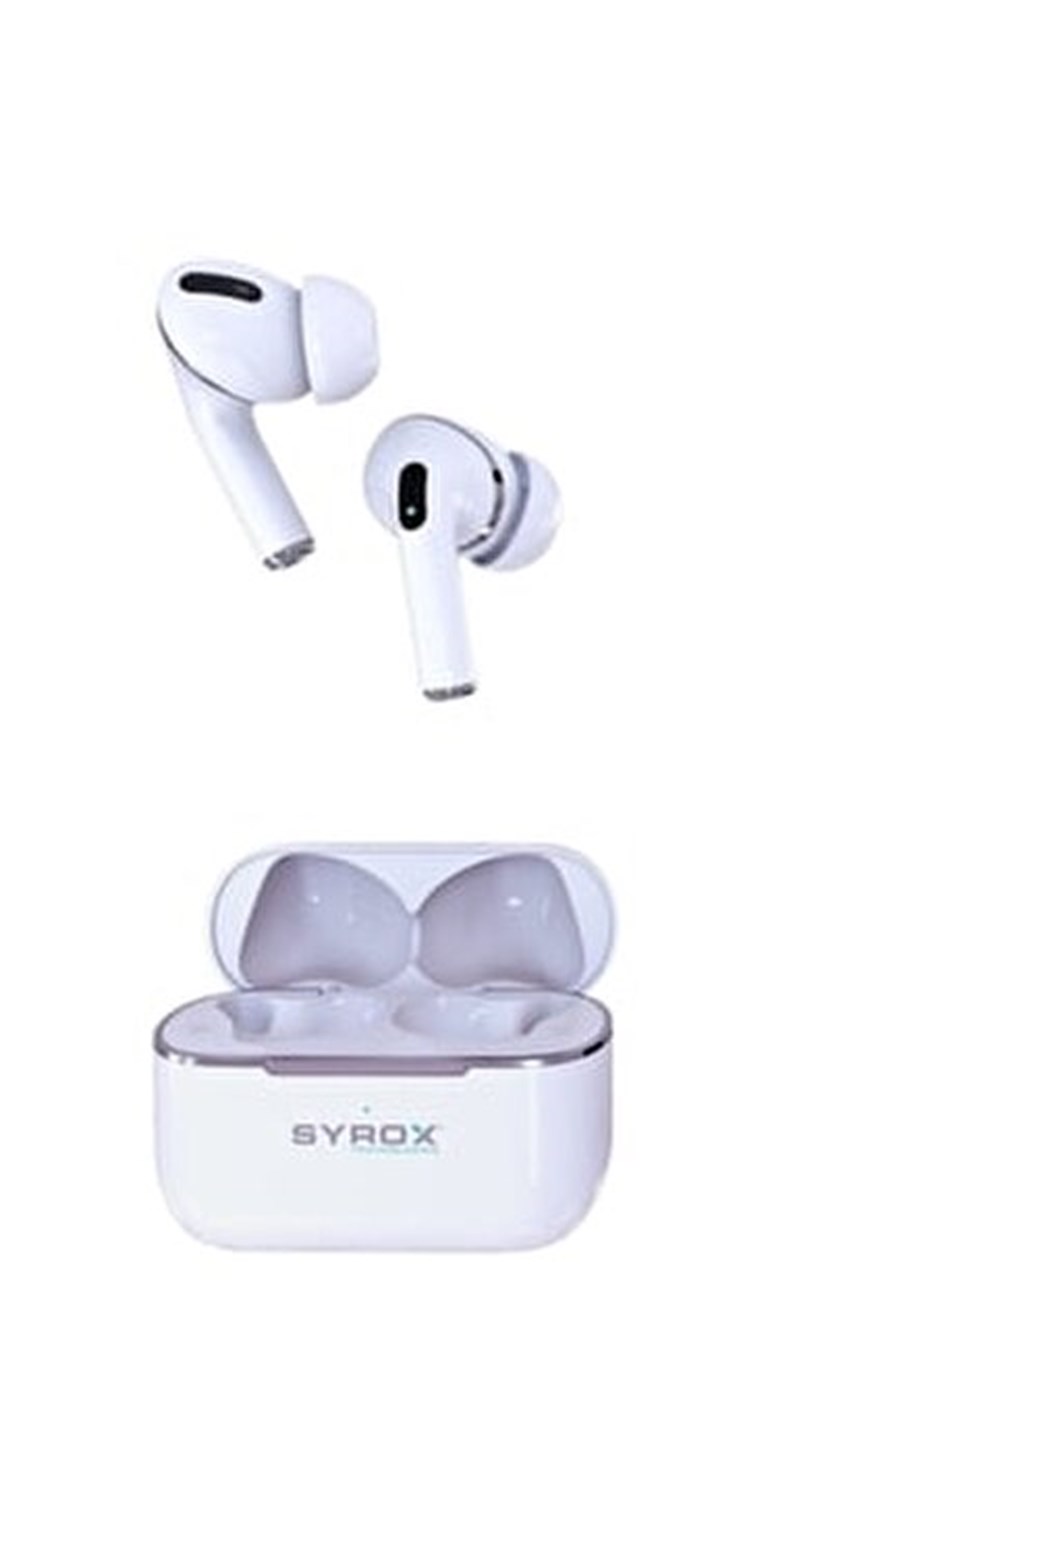 SYROX BLUETOOTH AIRPODS MX20